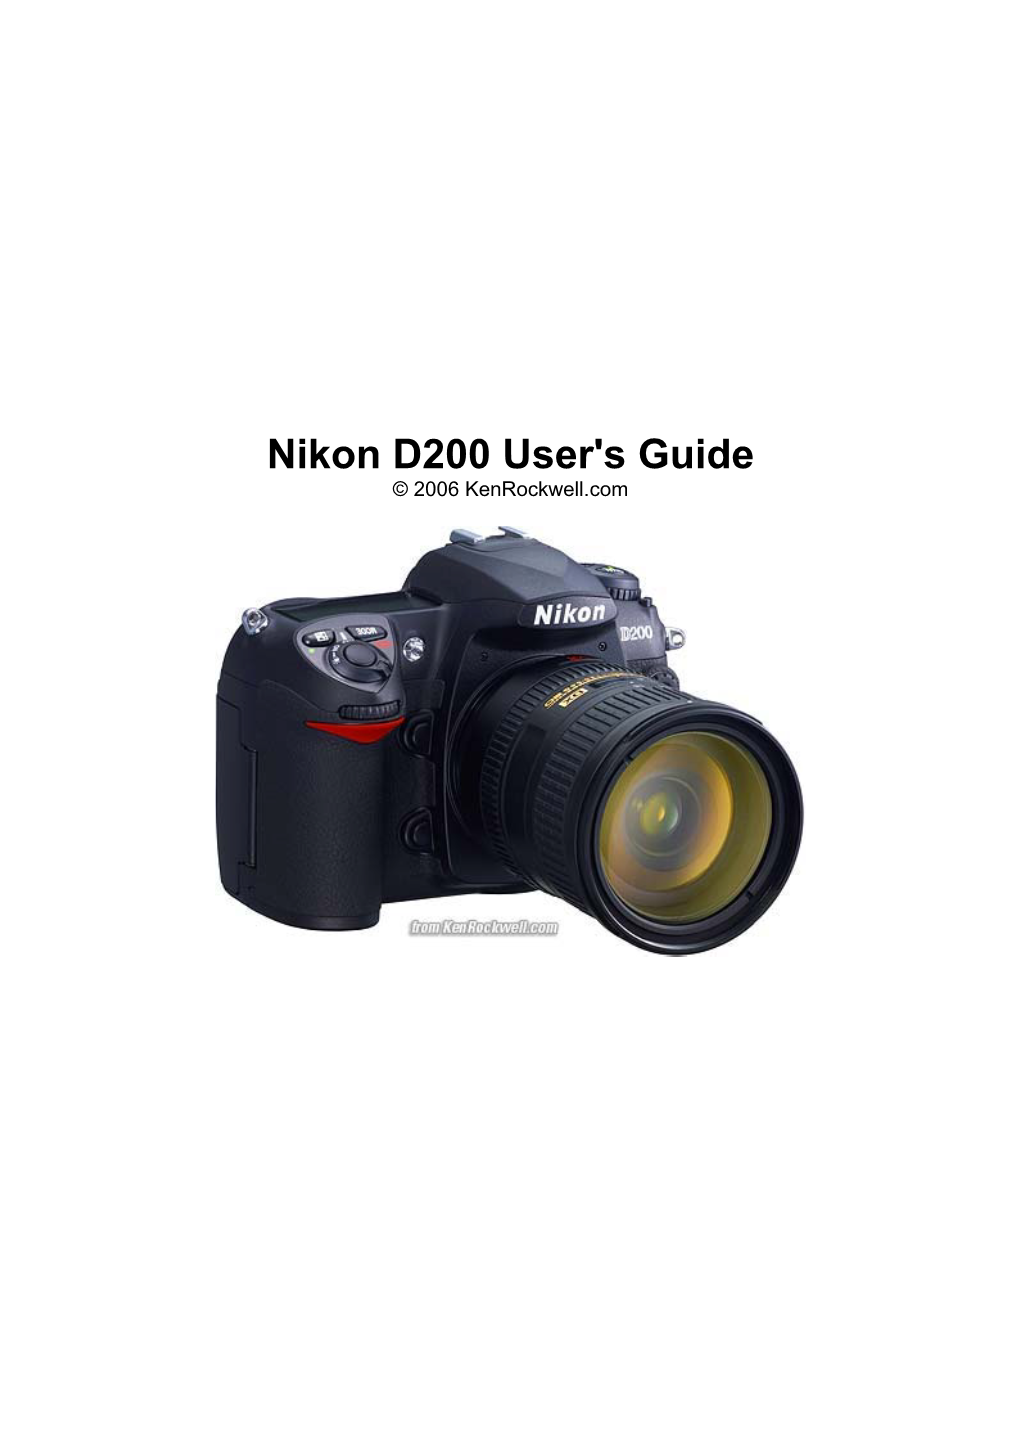 Nikon D200 User's Guide © 2006 Kenrockwell.Com CONTENTS